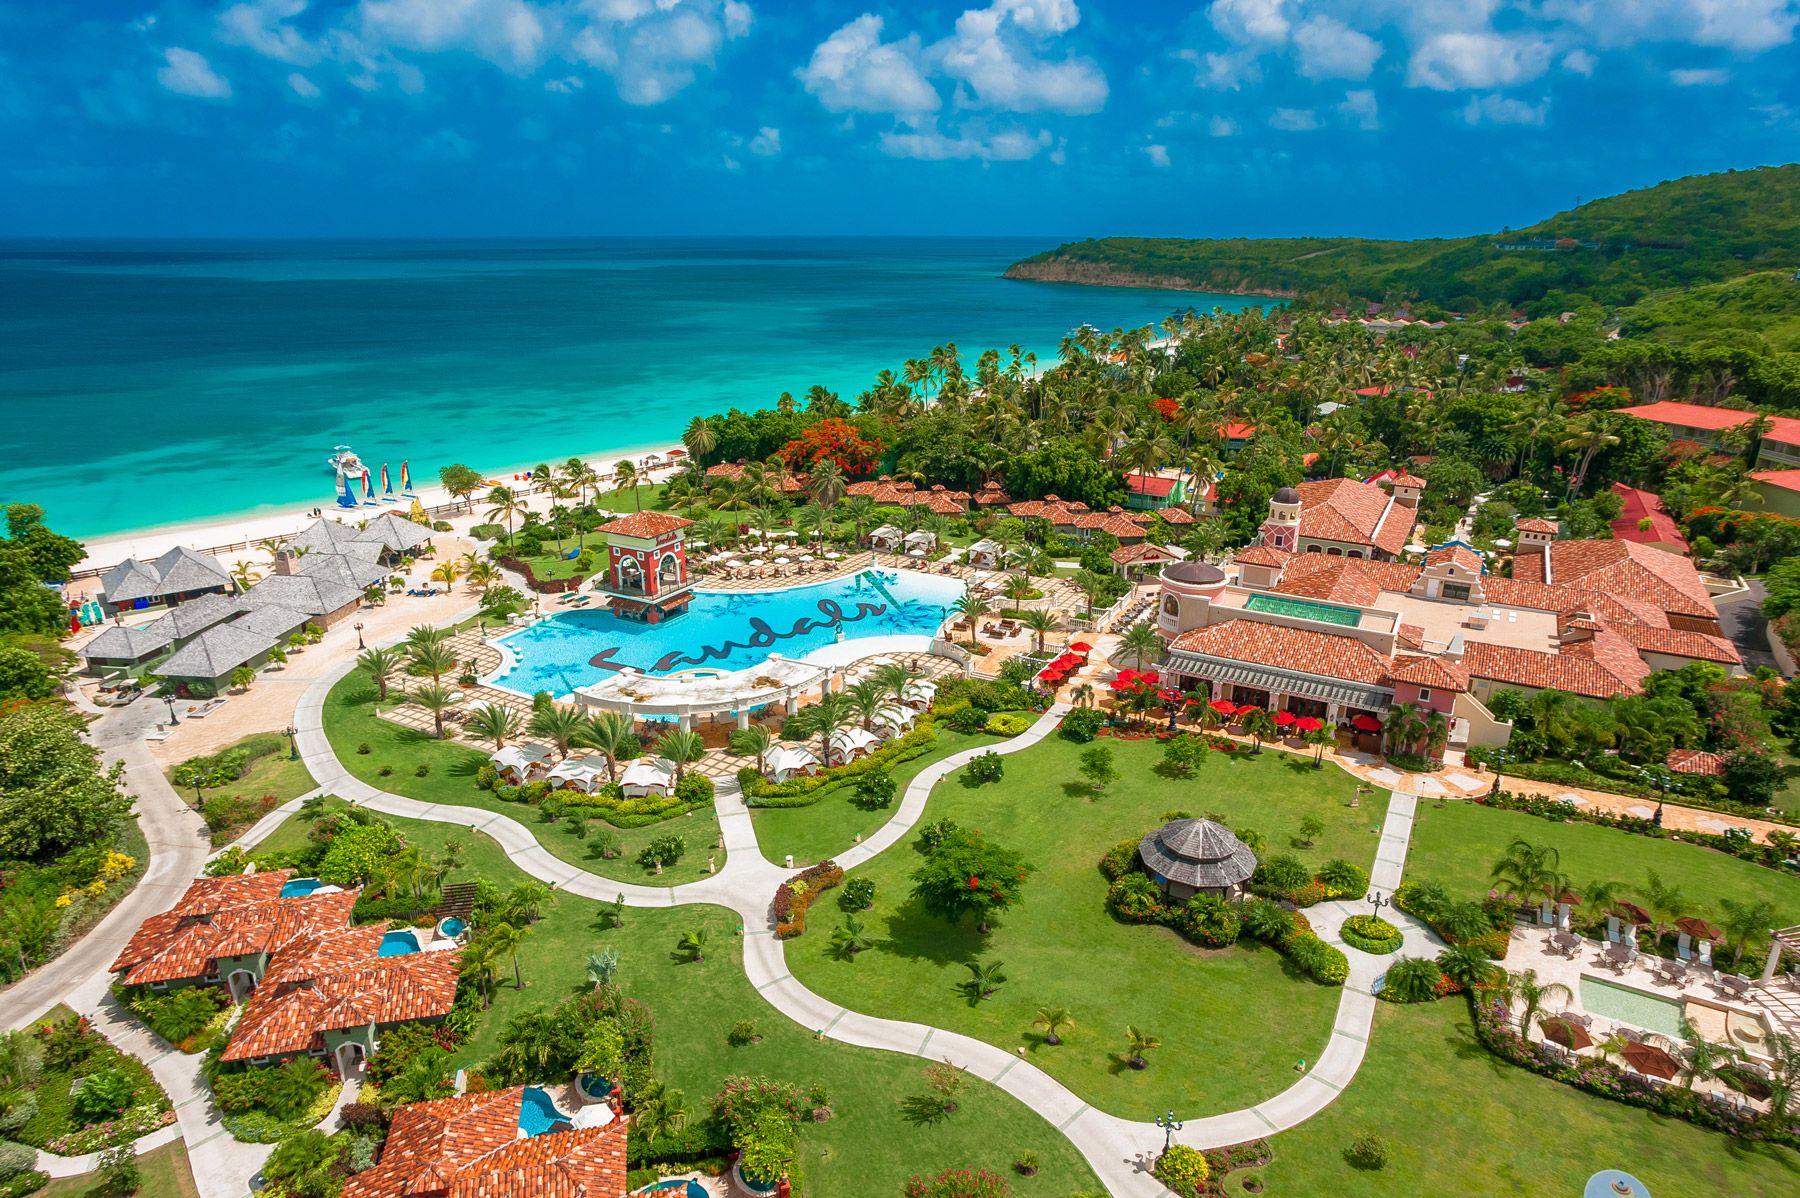 Three things guests love about... Sandals Grande Antigua. A full review.